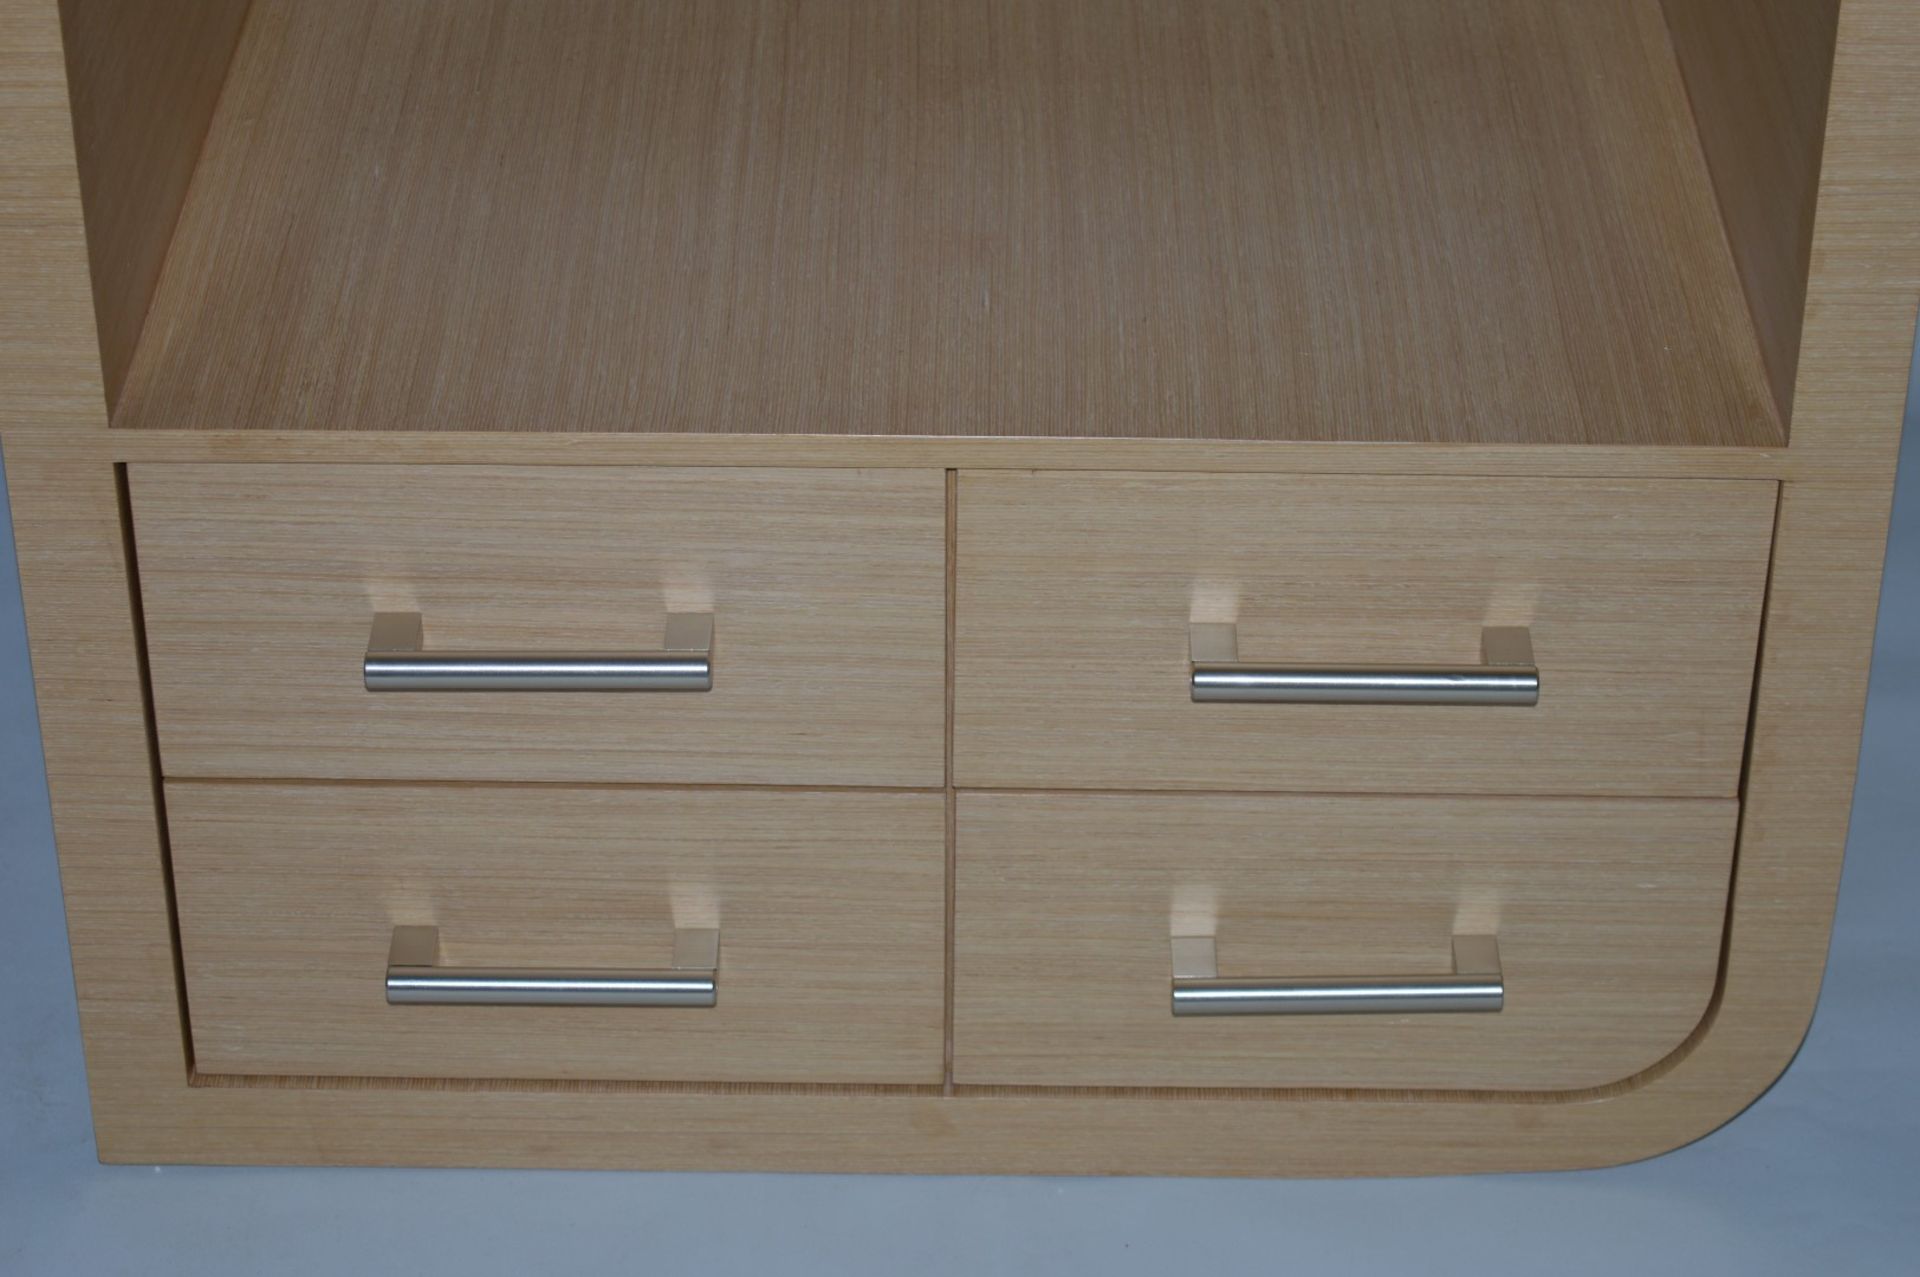 1 x Vogue ARC Series 1 Type C Bathroom VANITY UNIT in LIGHT OAK - 1600mm Width - Manufactured to the - Image 3 of 7